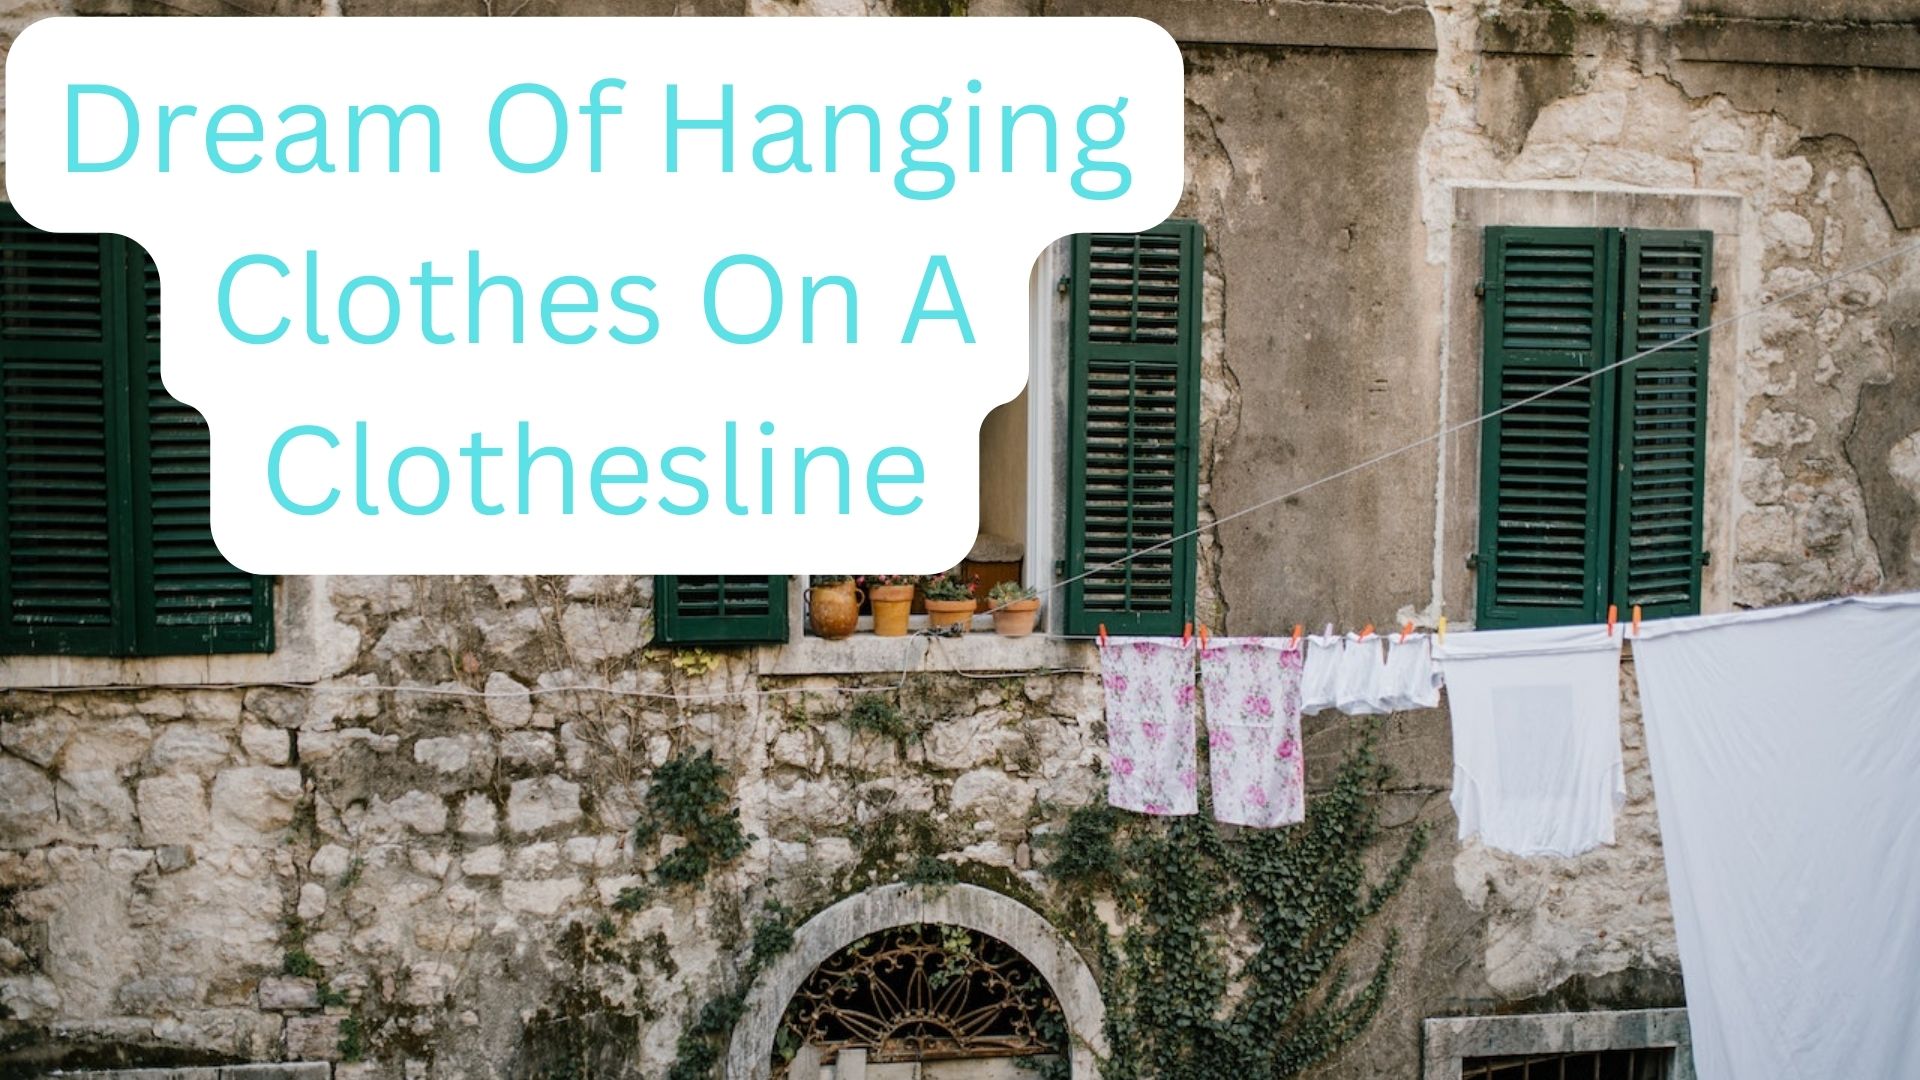 Dream Of Hanging Clothes On A Clothesline - What Does It Mean?